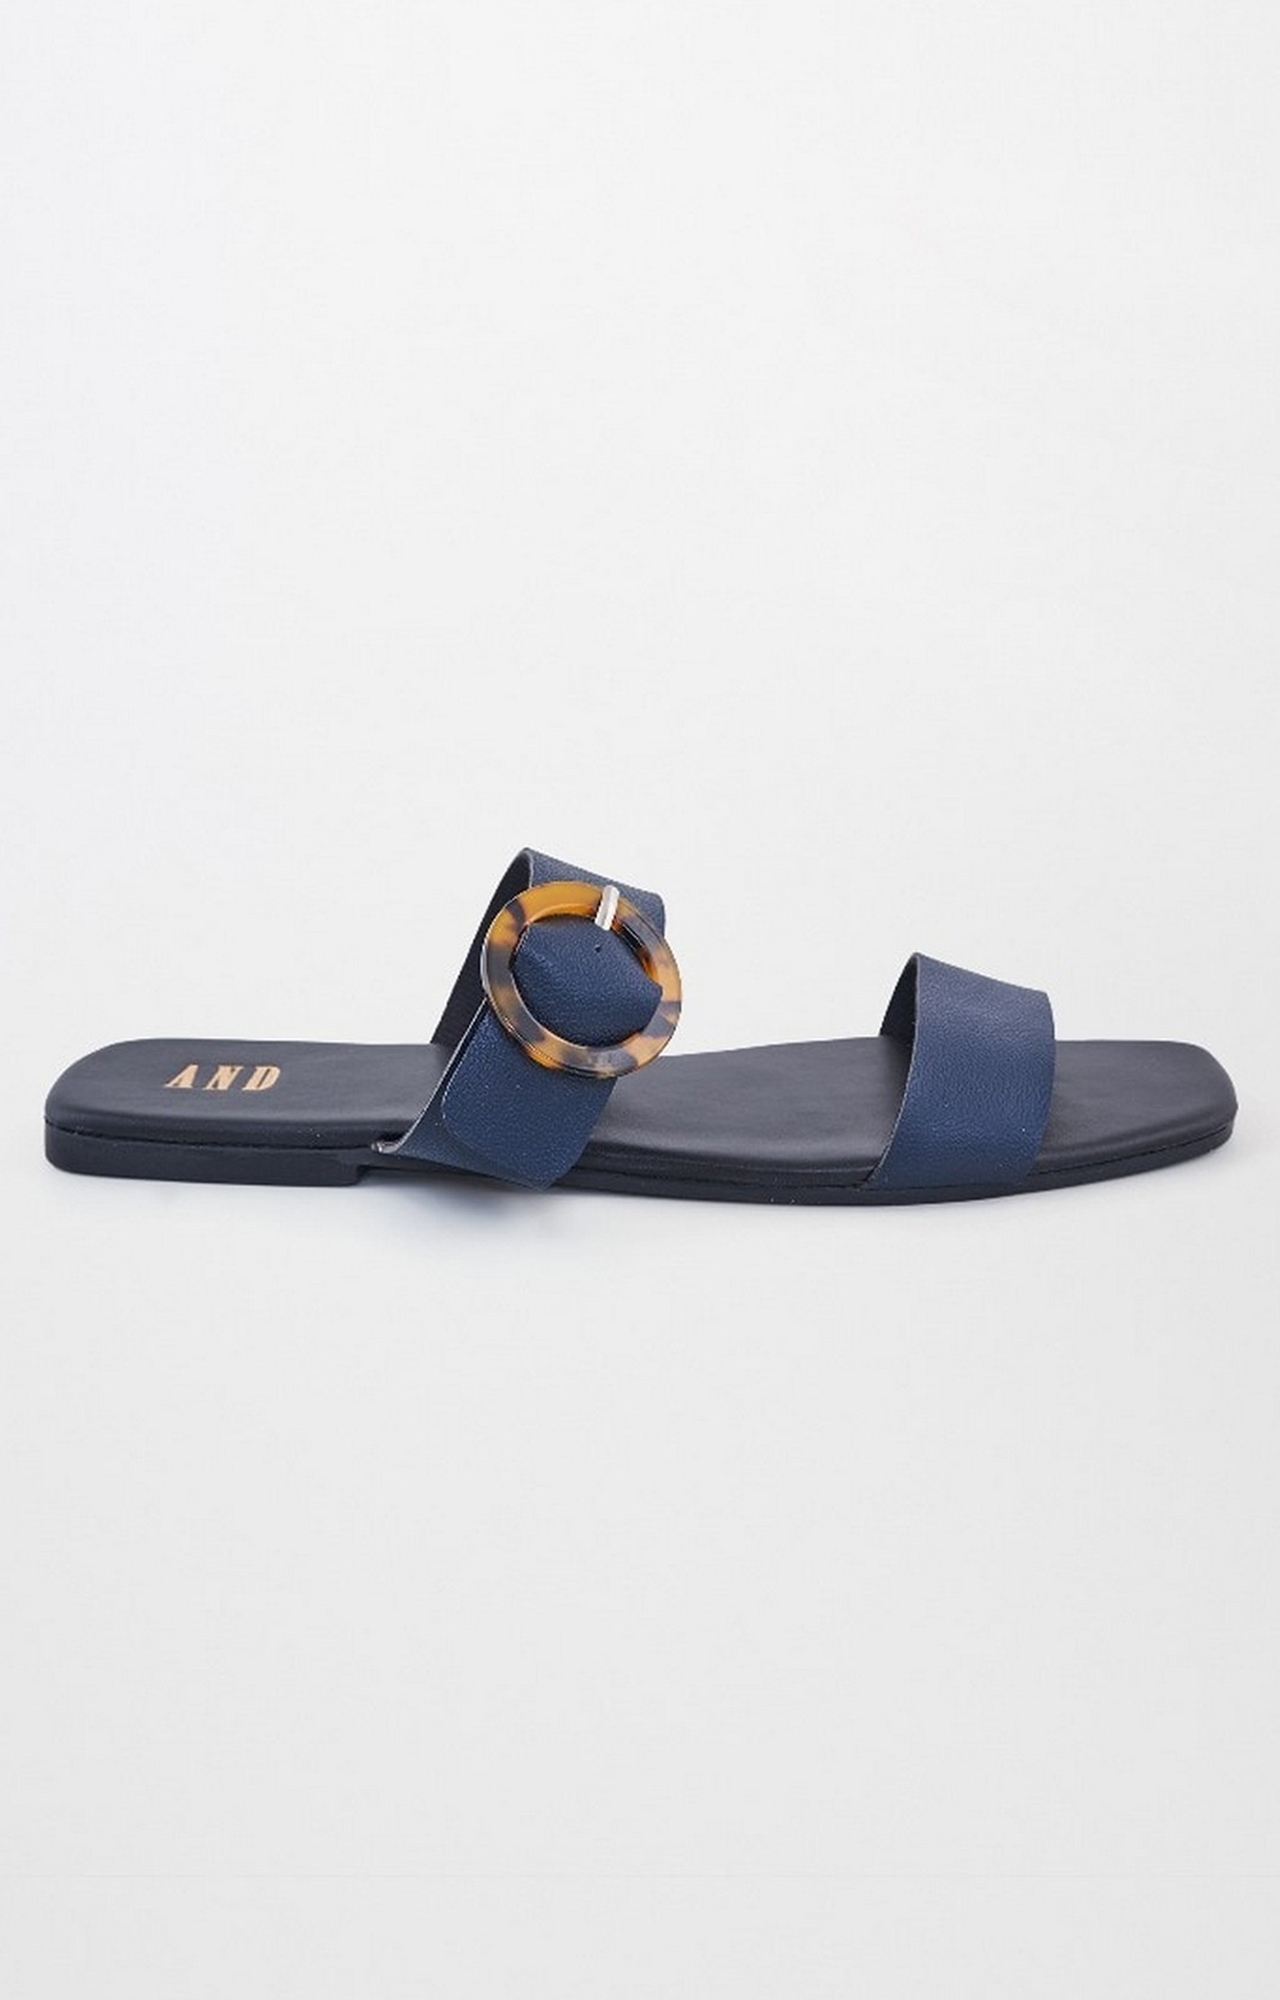 AND | Navy Sandals